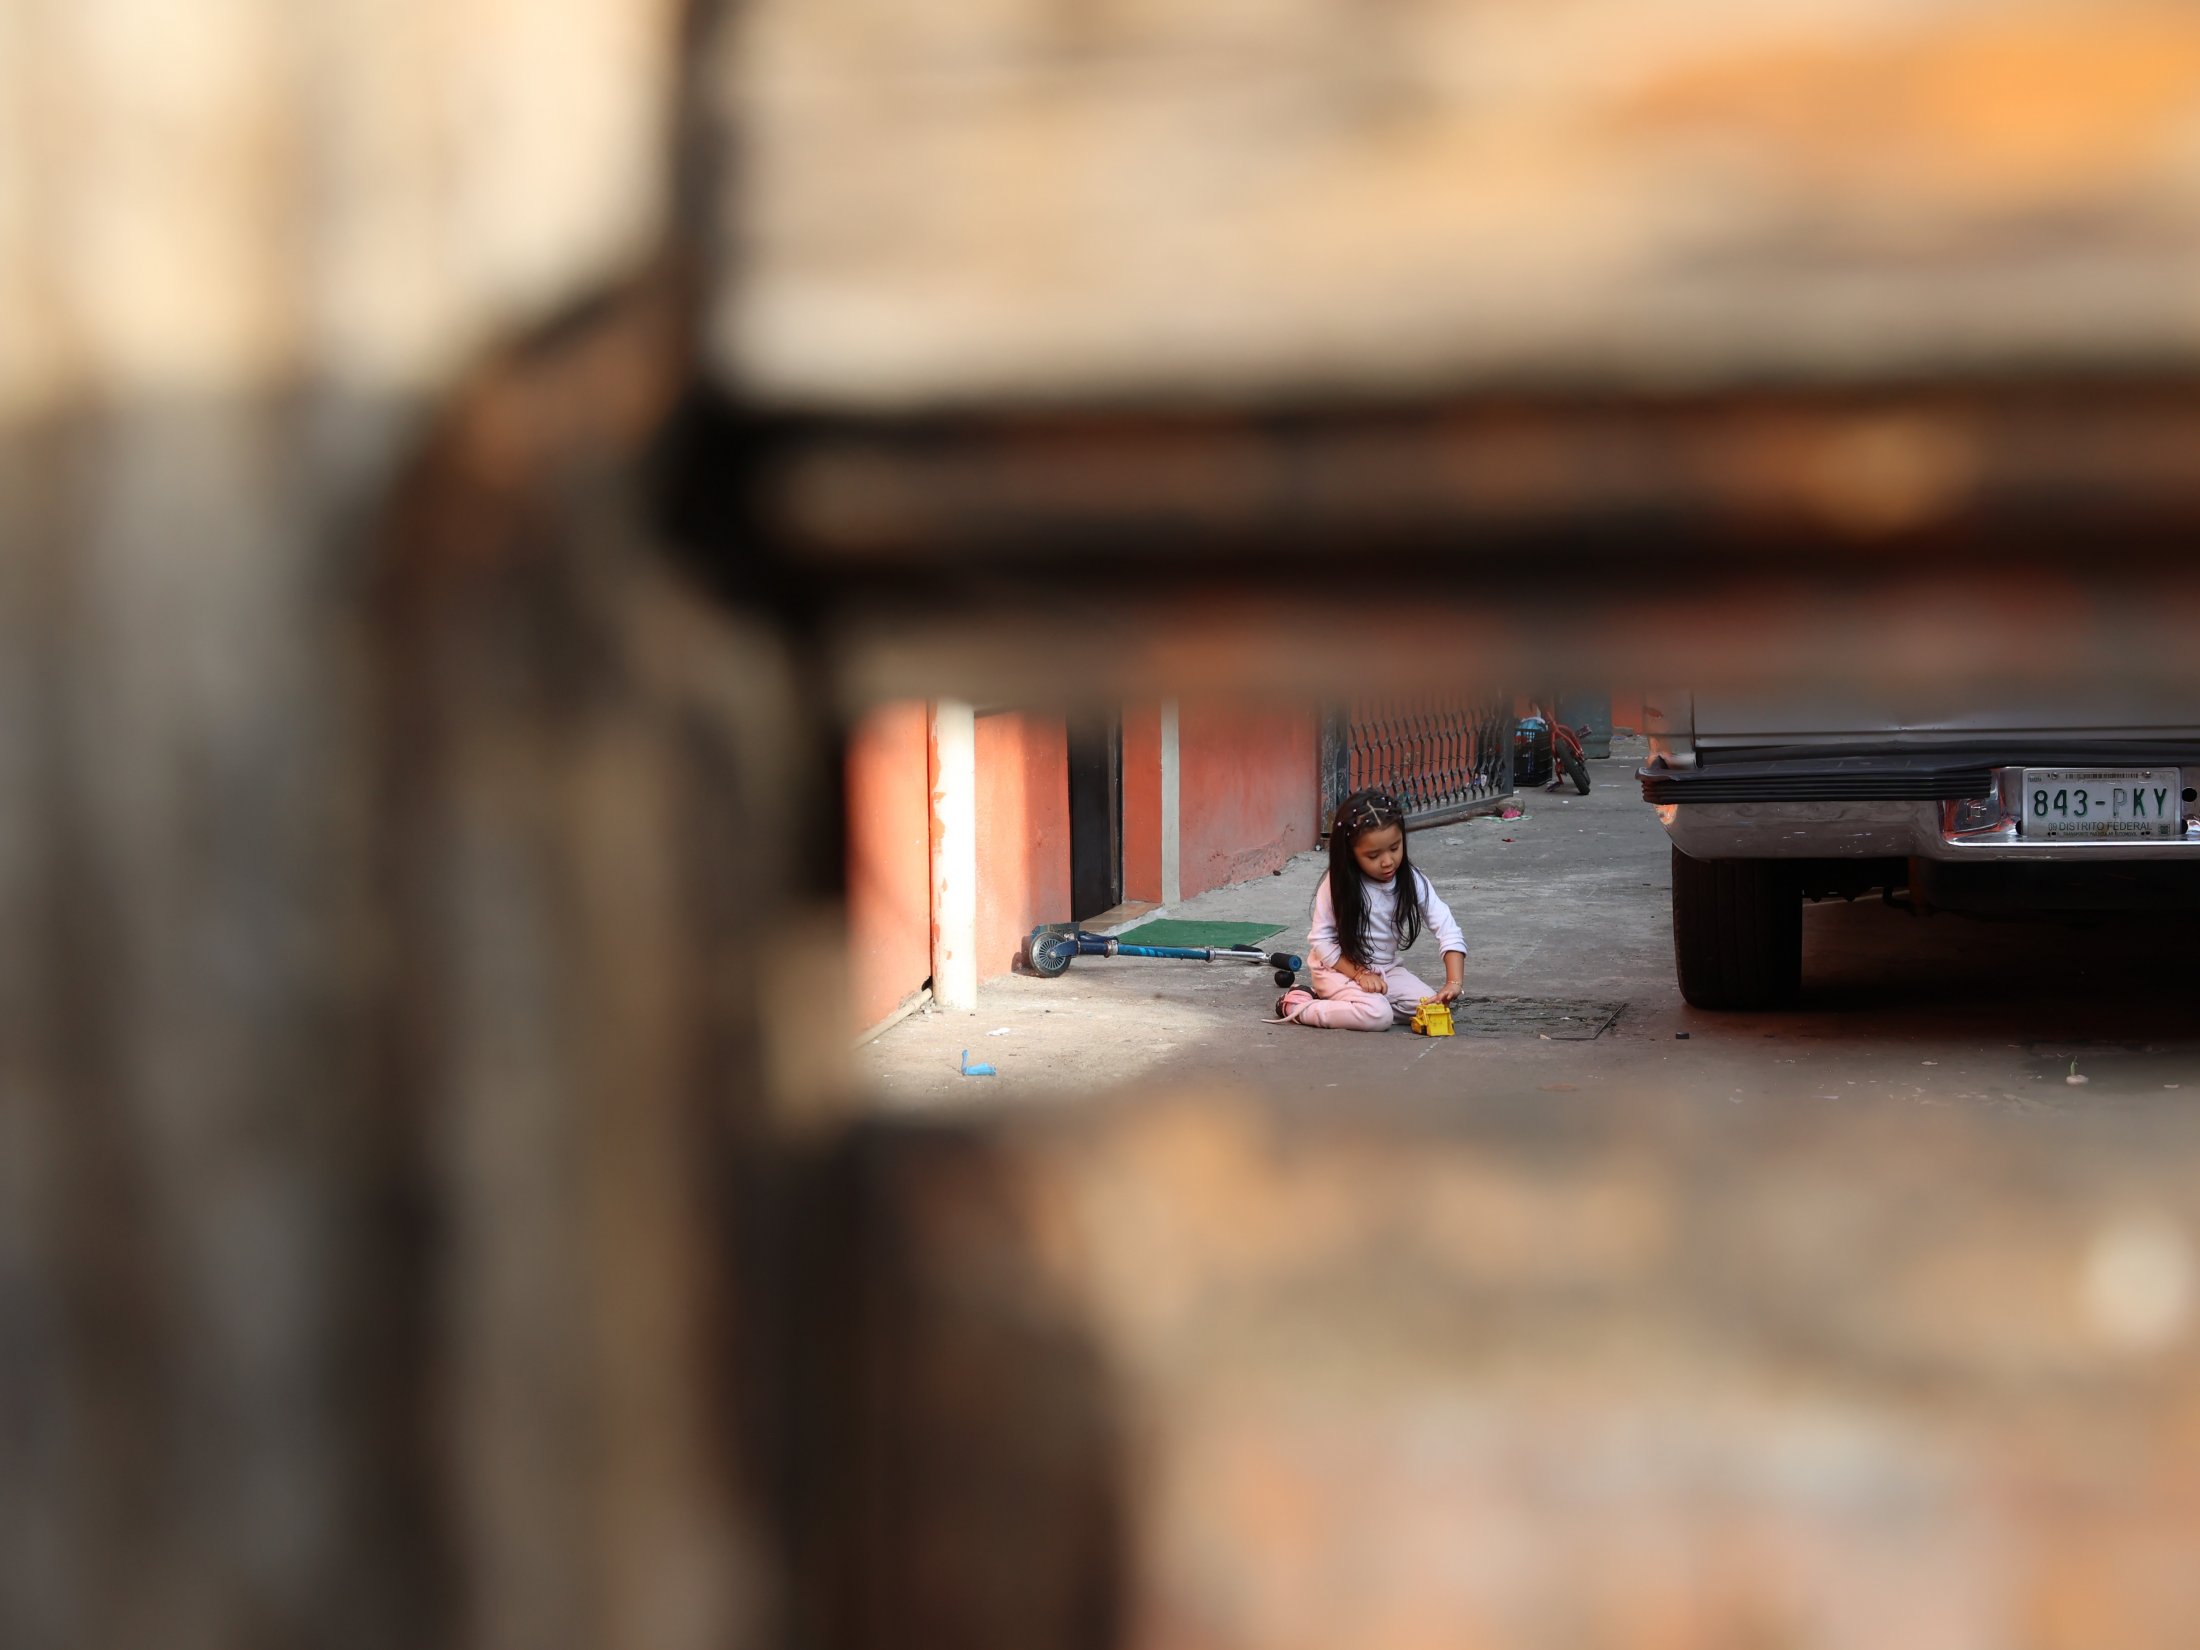 B22 - Mexico, a small mountain town. Closed in the middle of the yard, a girl, full of delicacy, plays immersed in her world, unaware of her observers and the horror of the outside world